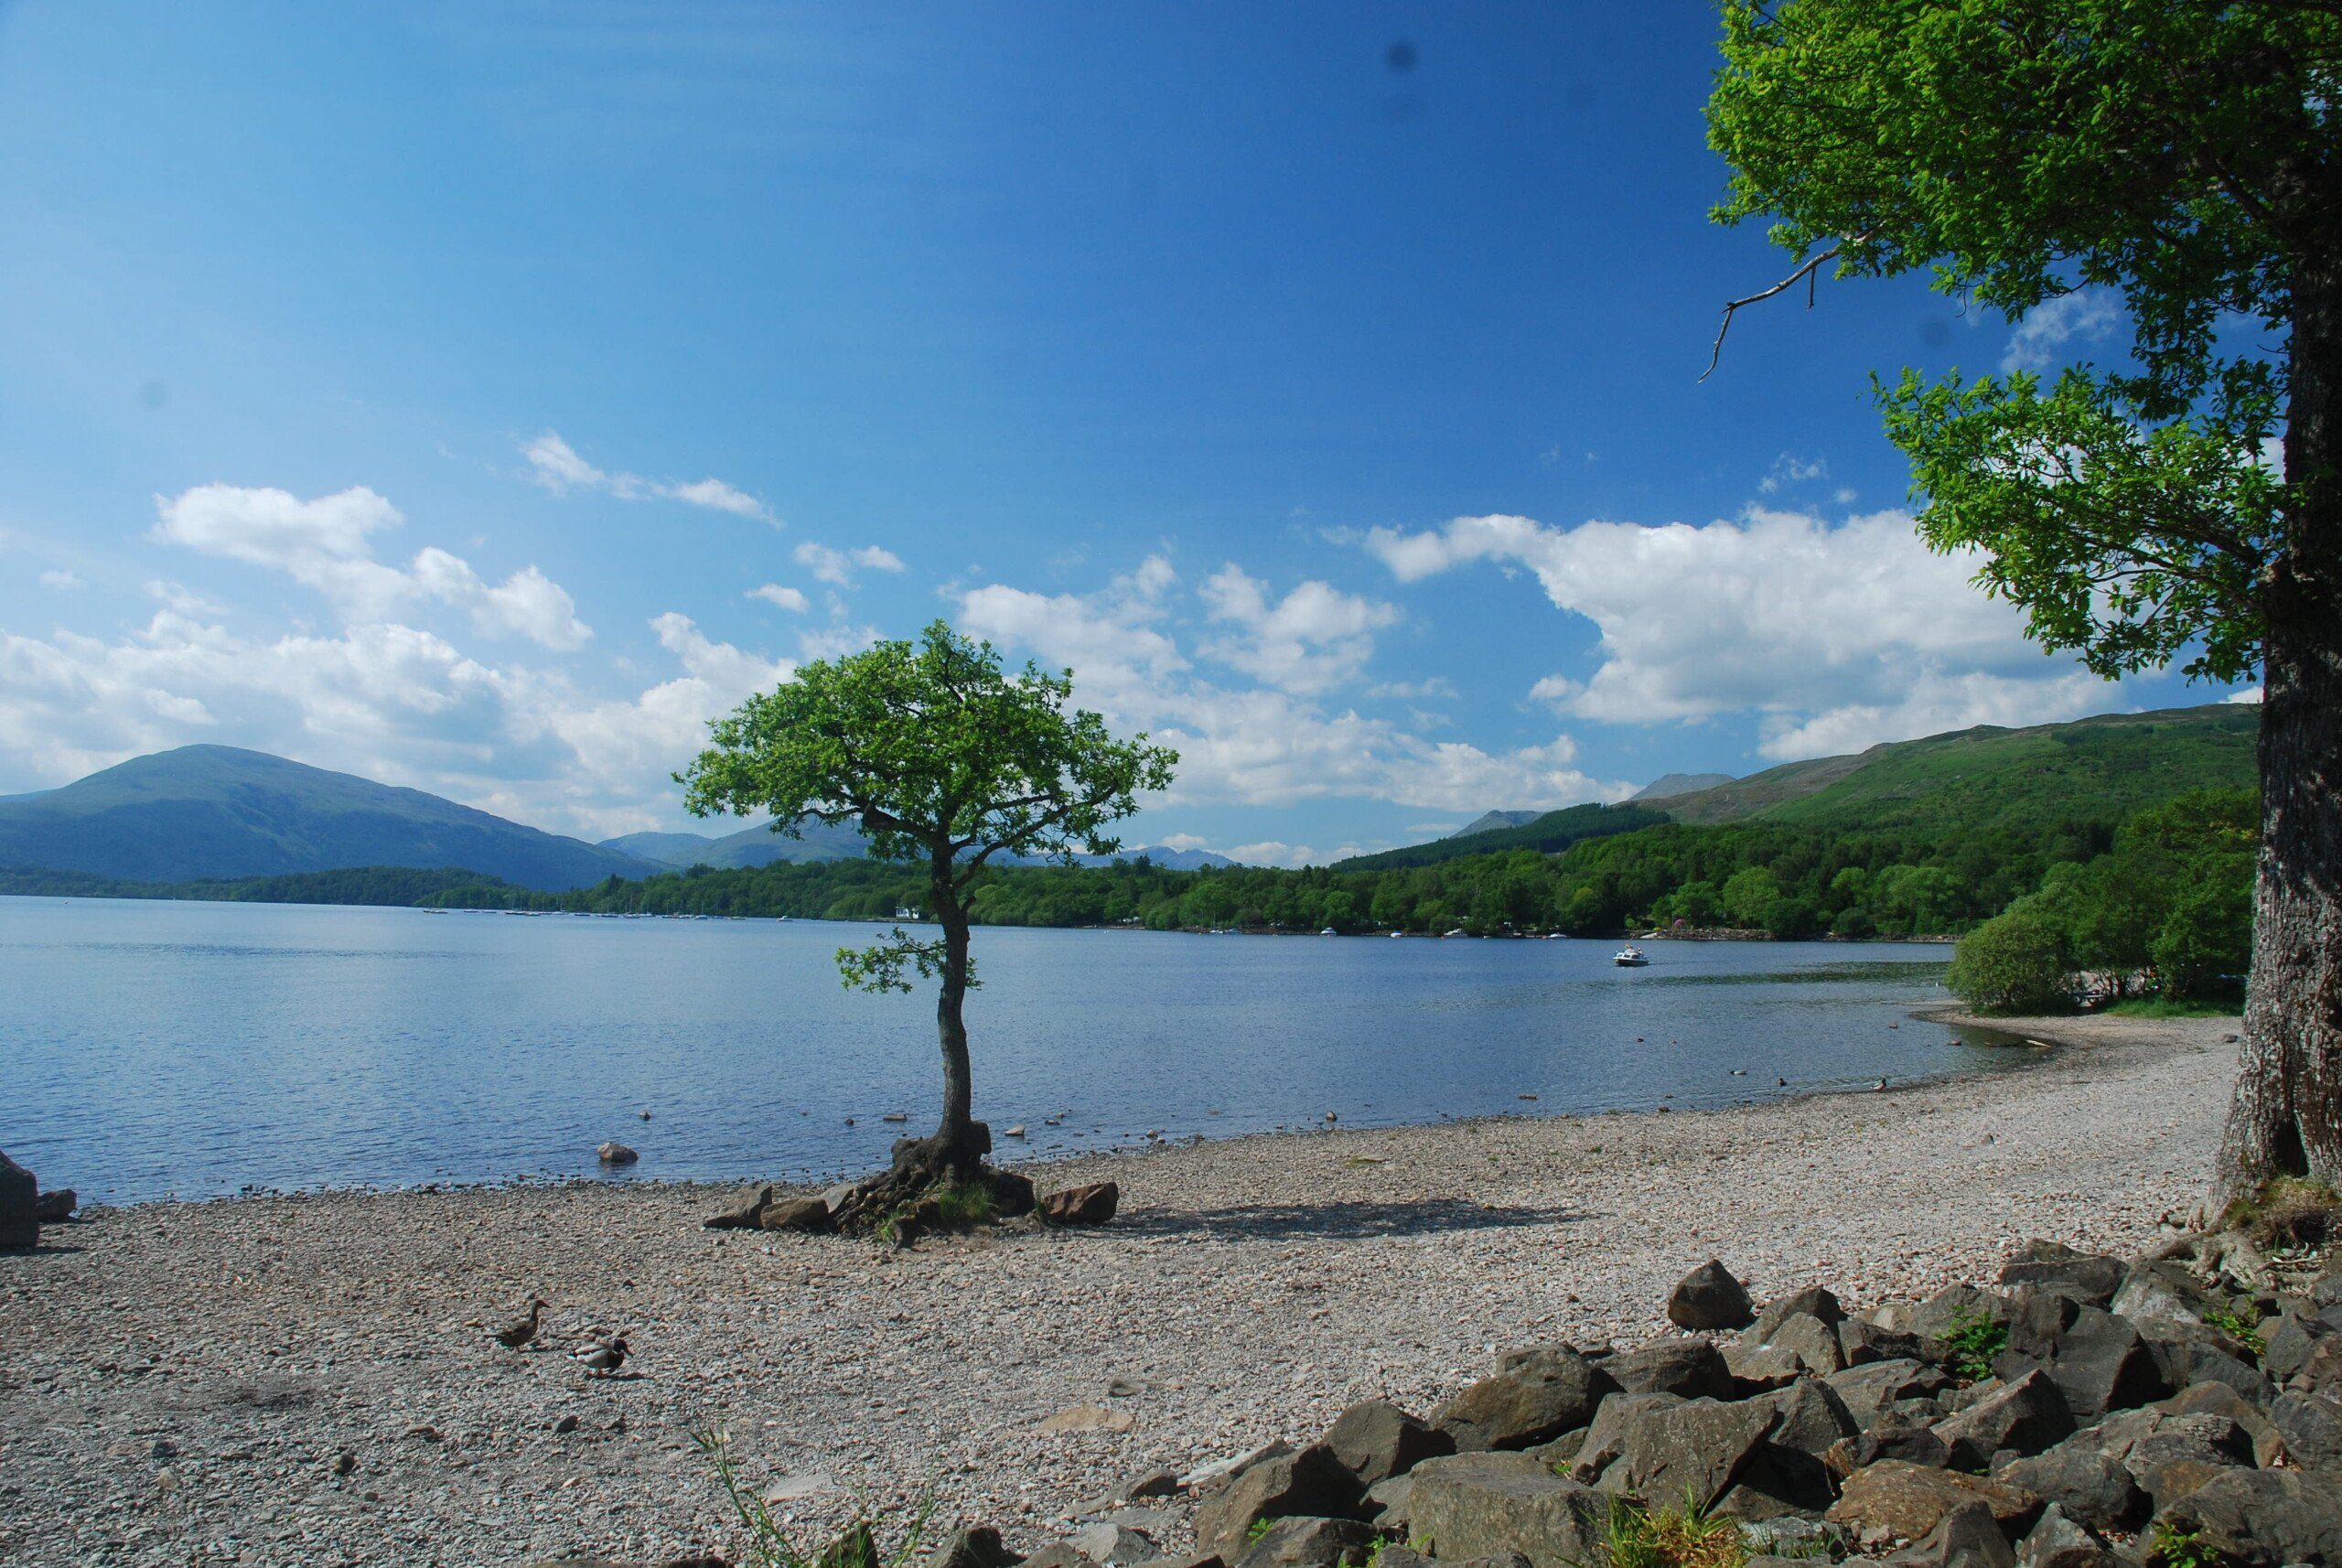 Single tree standing on the shore of Loch Lomond, on the West Highland Way